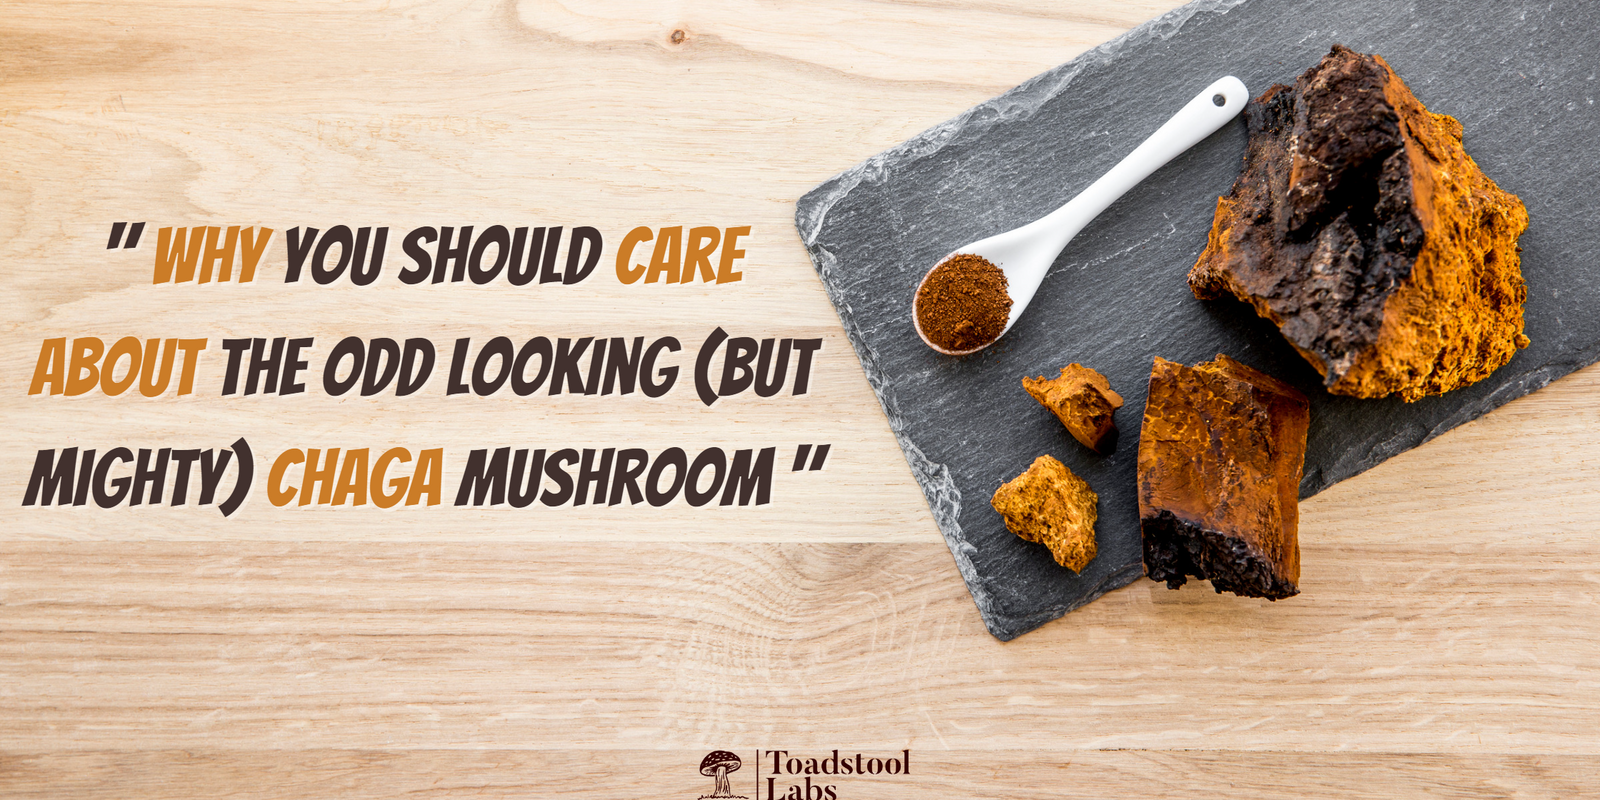 "Why You Should Care About the odd looking (But Mighty) Chaga Mushroom"